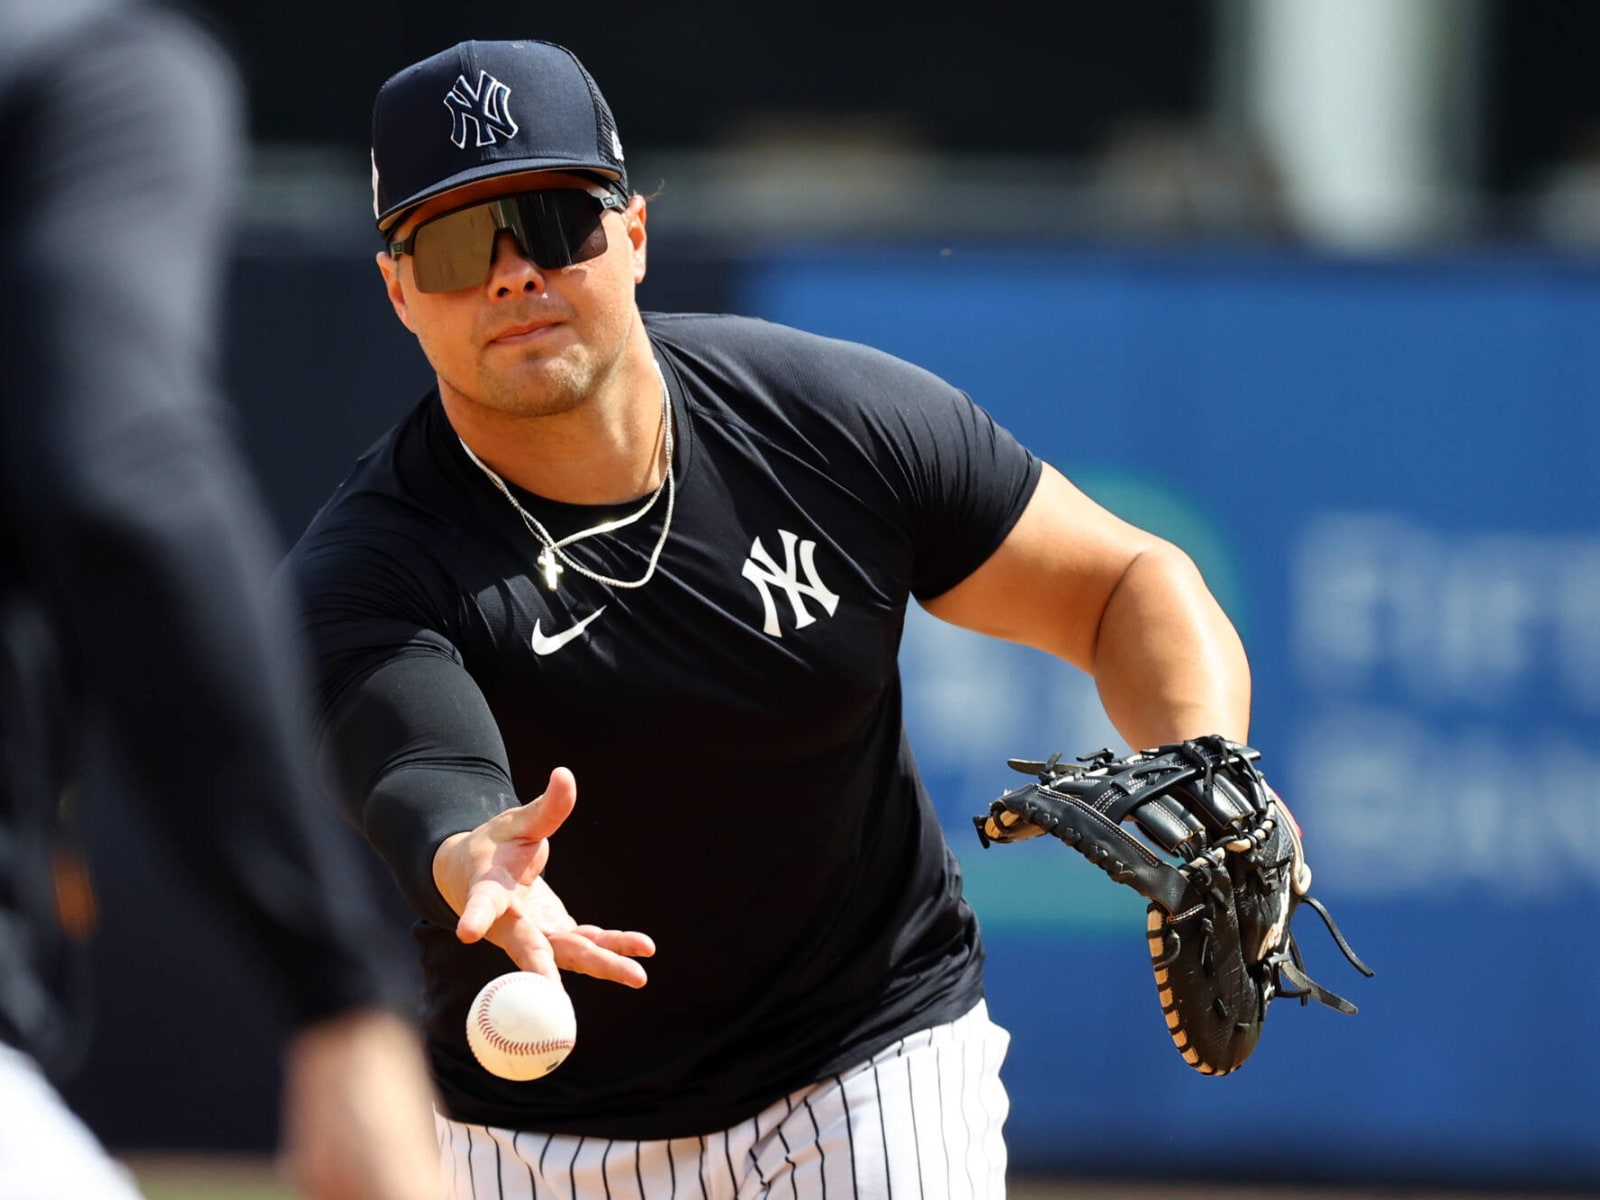 Catching up with New York Yankees 1B Luke Voit, More from former #MSUBears  star Luke Voit on his relationship with Coach Guttin and his alma mater  #BearsUnite